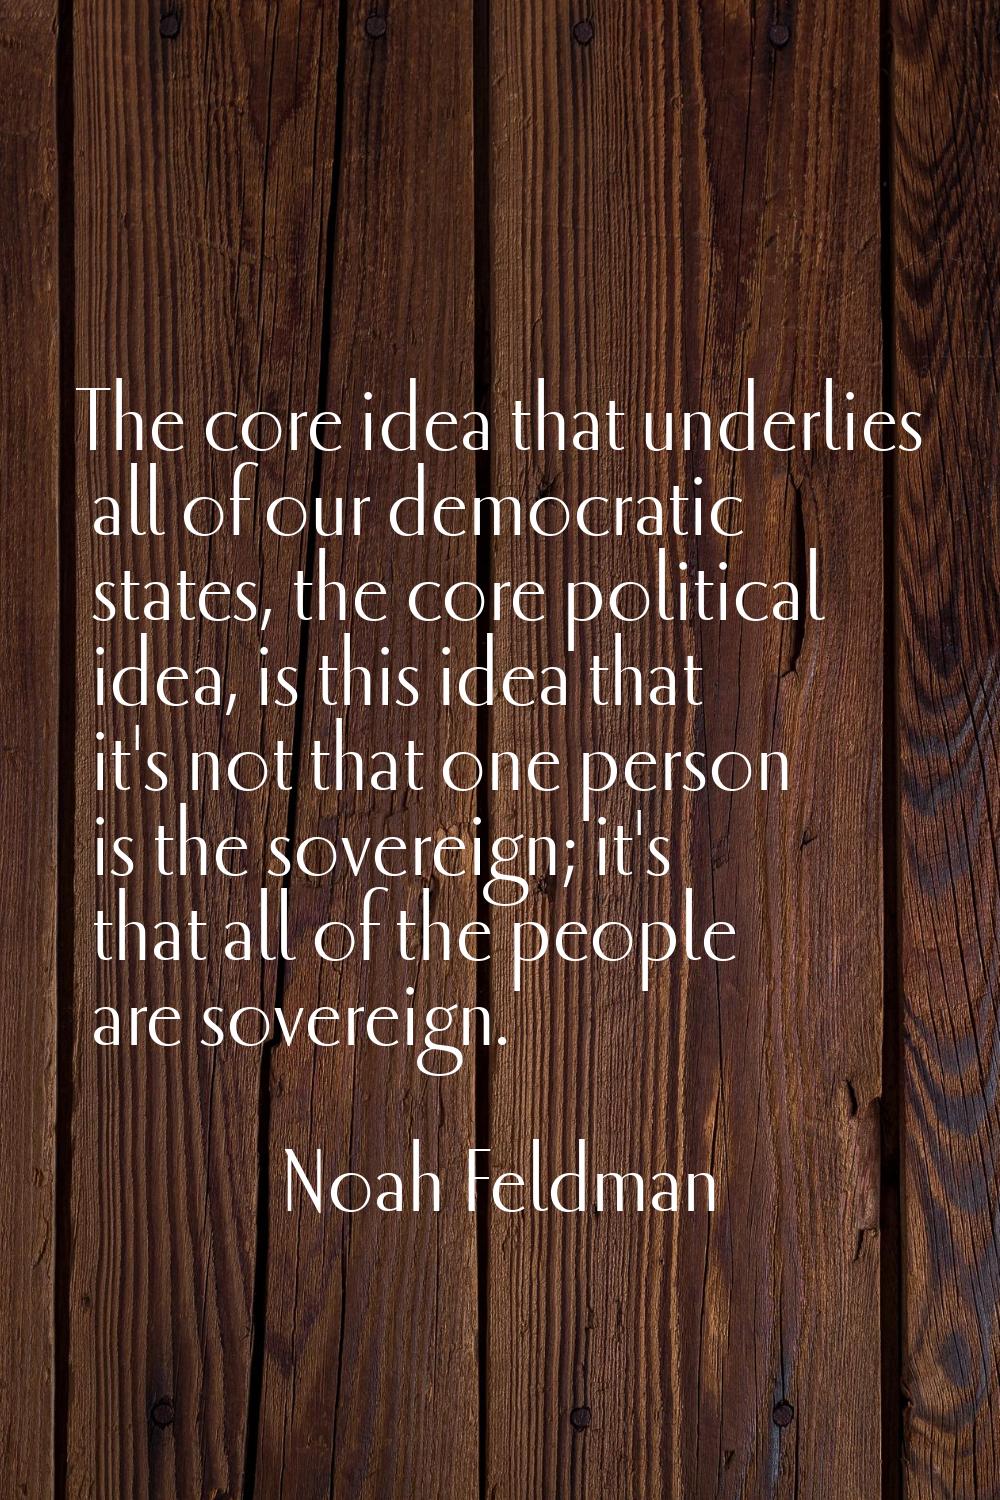 The core idea that underlies all of our democratic states, the core political idea, is this idea th